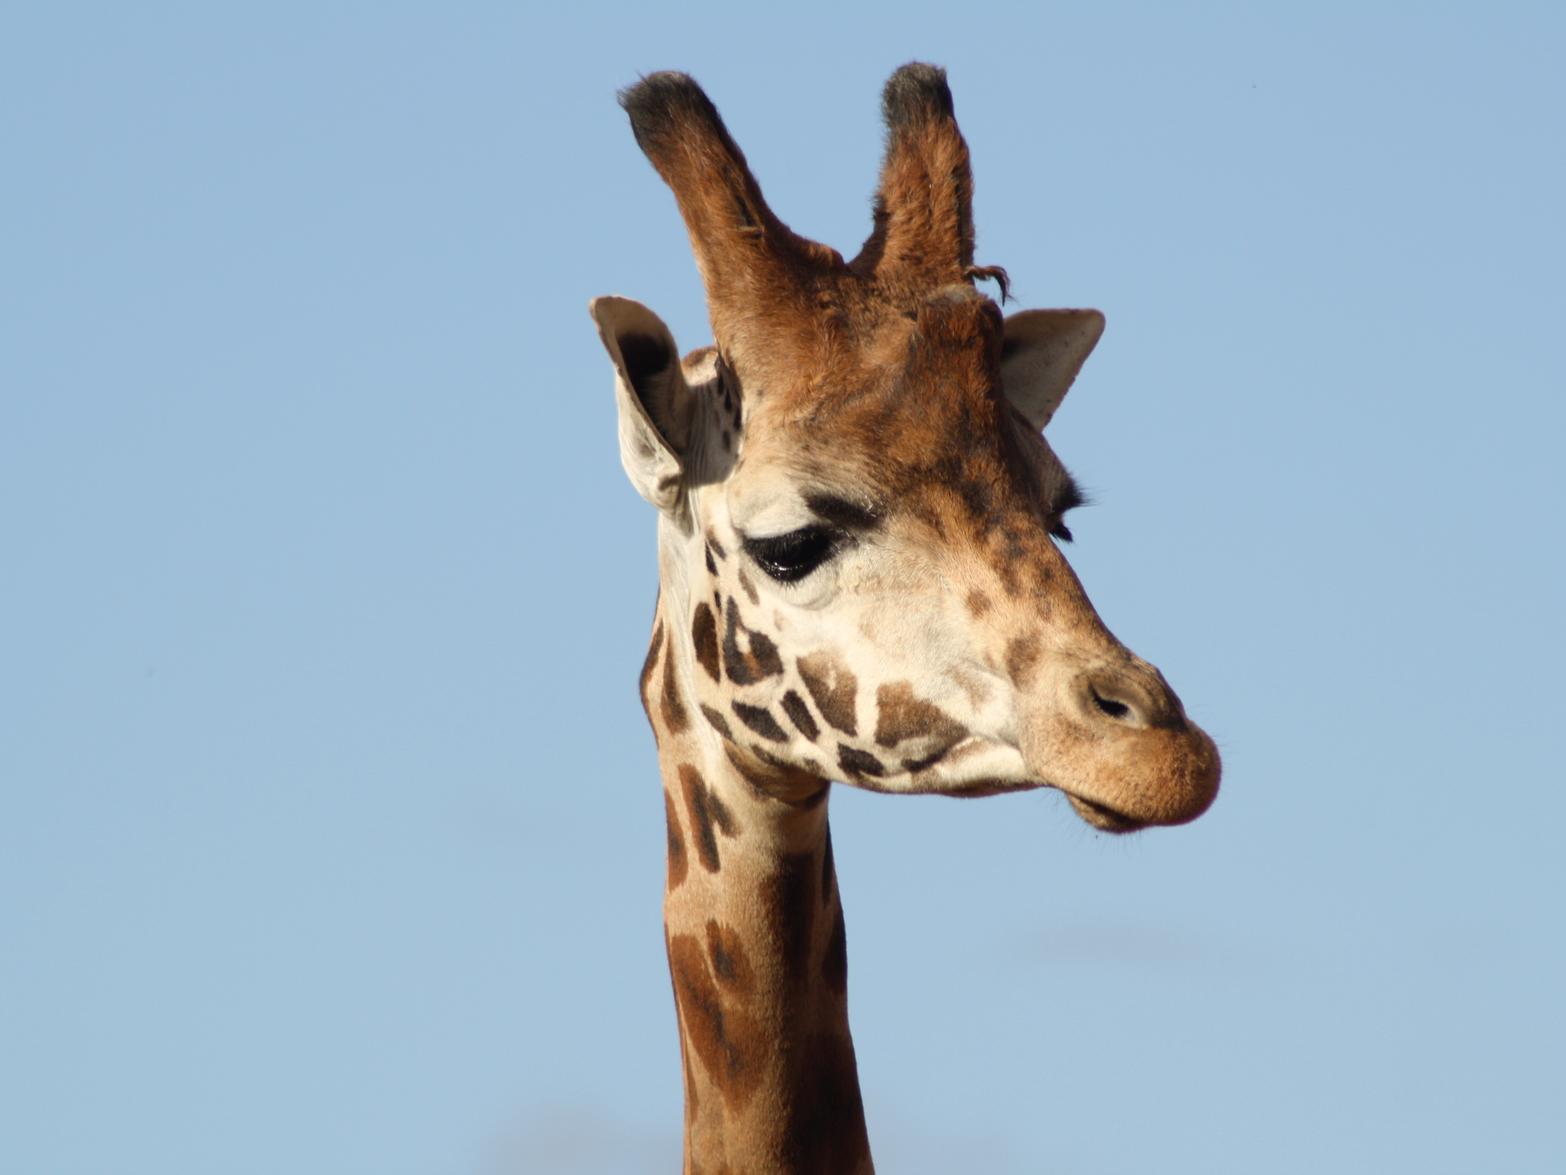 The park is home to four giraffes: Jambo, Jengo, Behansin and Palle help to raise awareness over conservation efforts as there is an estimated 1,500 giraffes remaining in the wild.